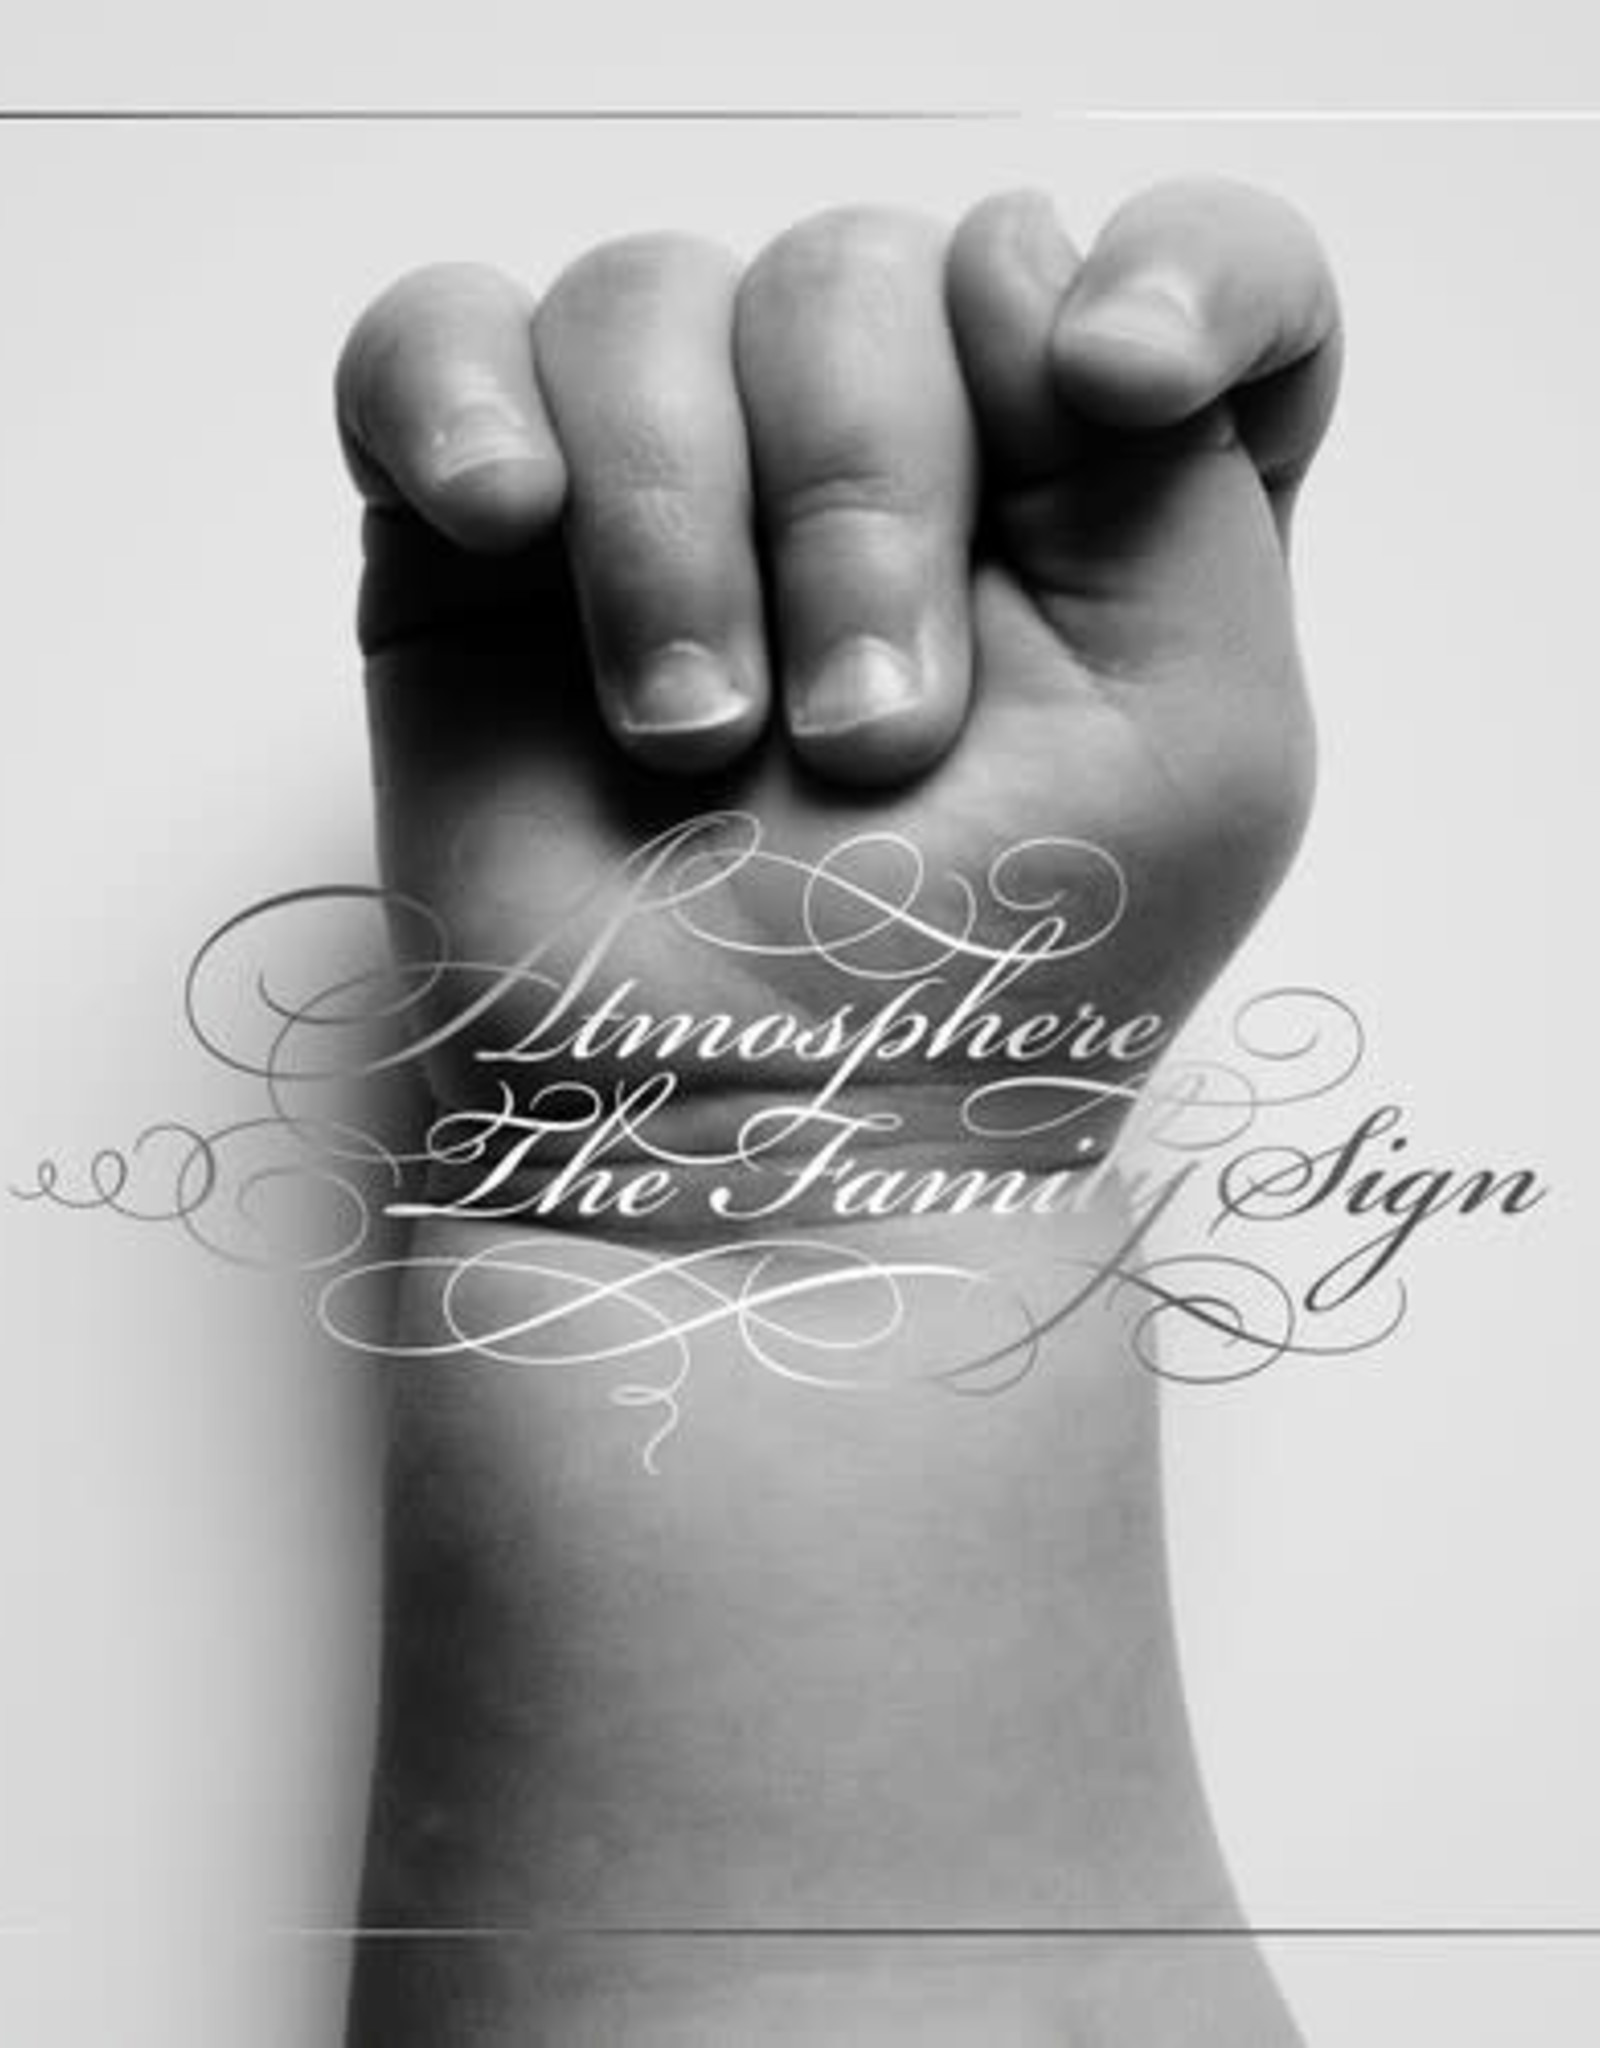 Atmosphere - The Family Sign (2xLP+7")